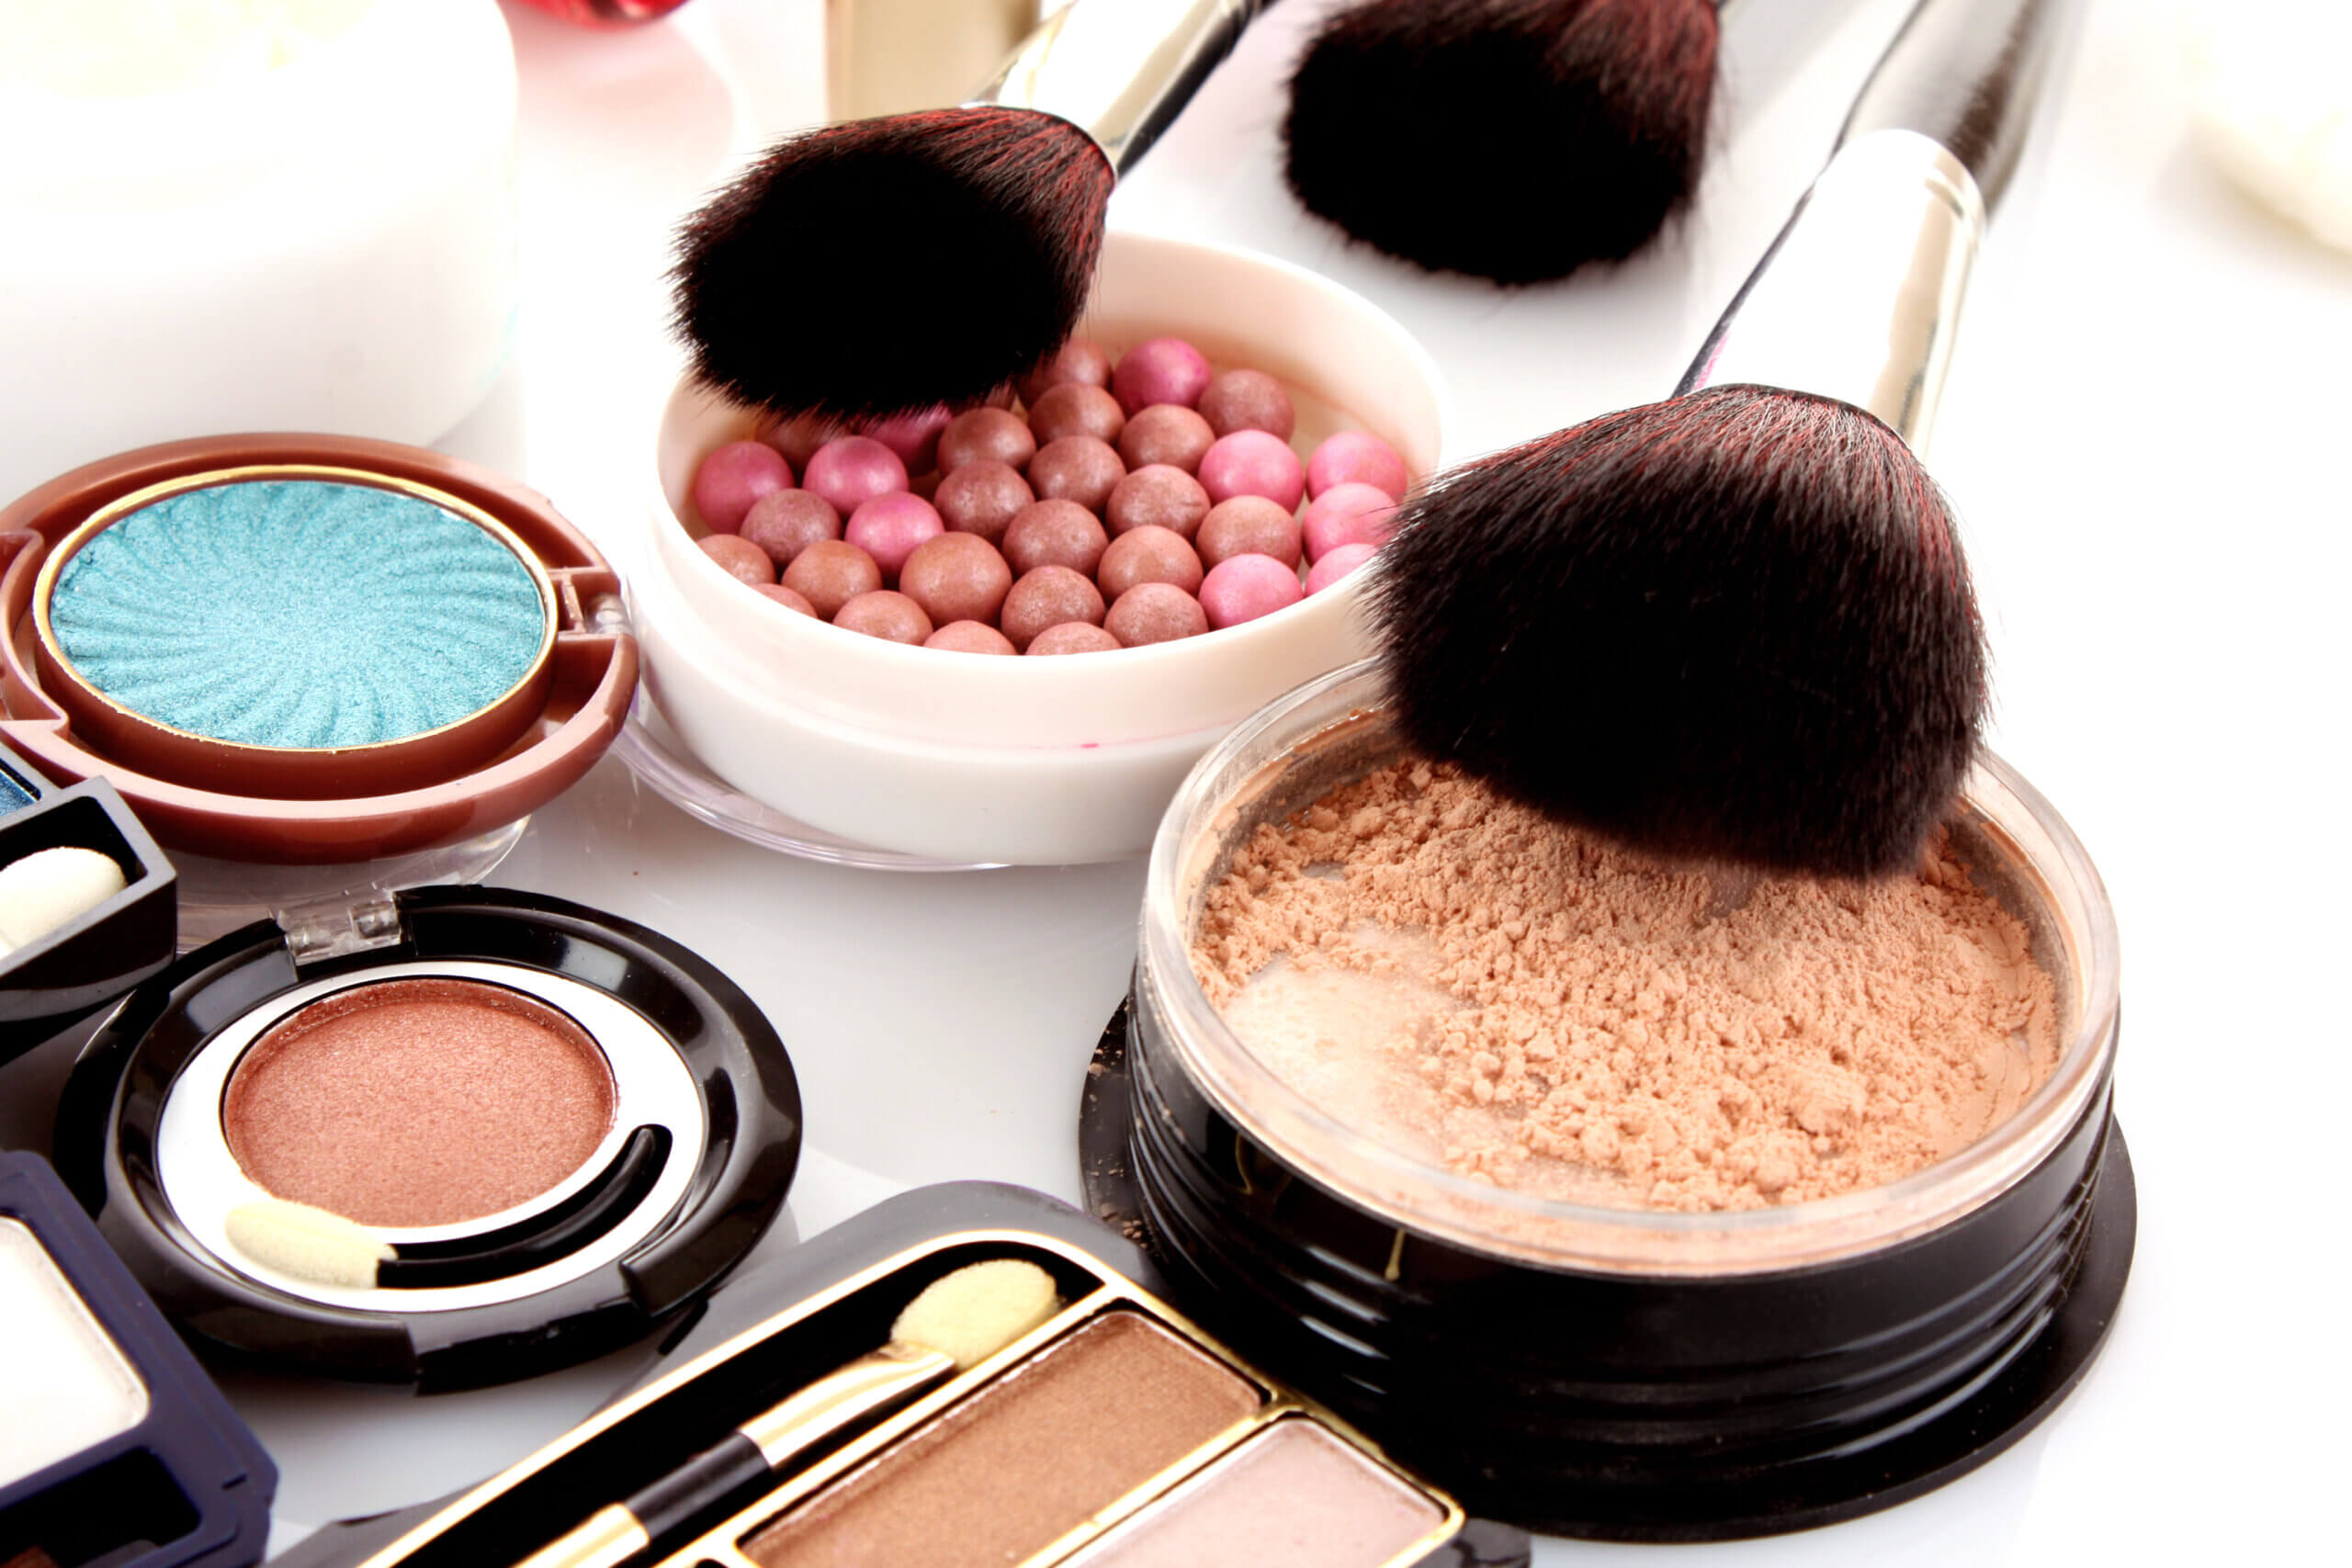 The Makeup That Is Most Likely To Contain Talc – And Potentially Harmful Asbestos